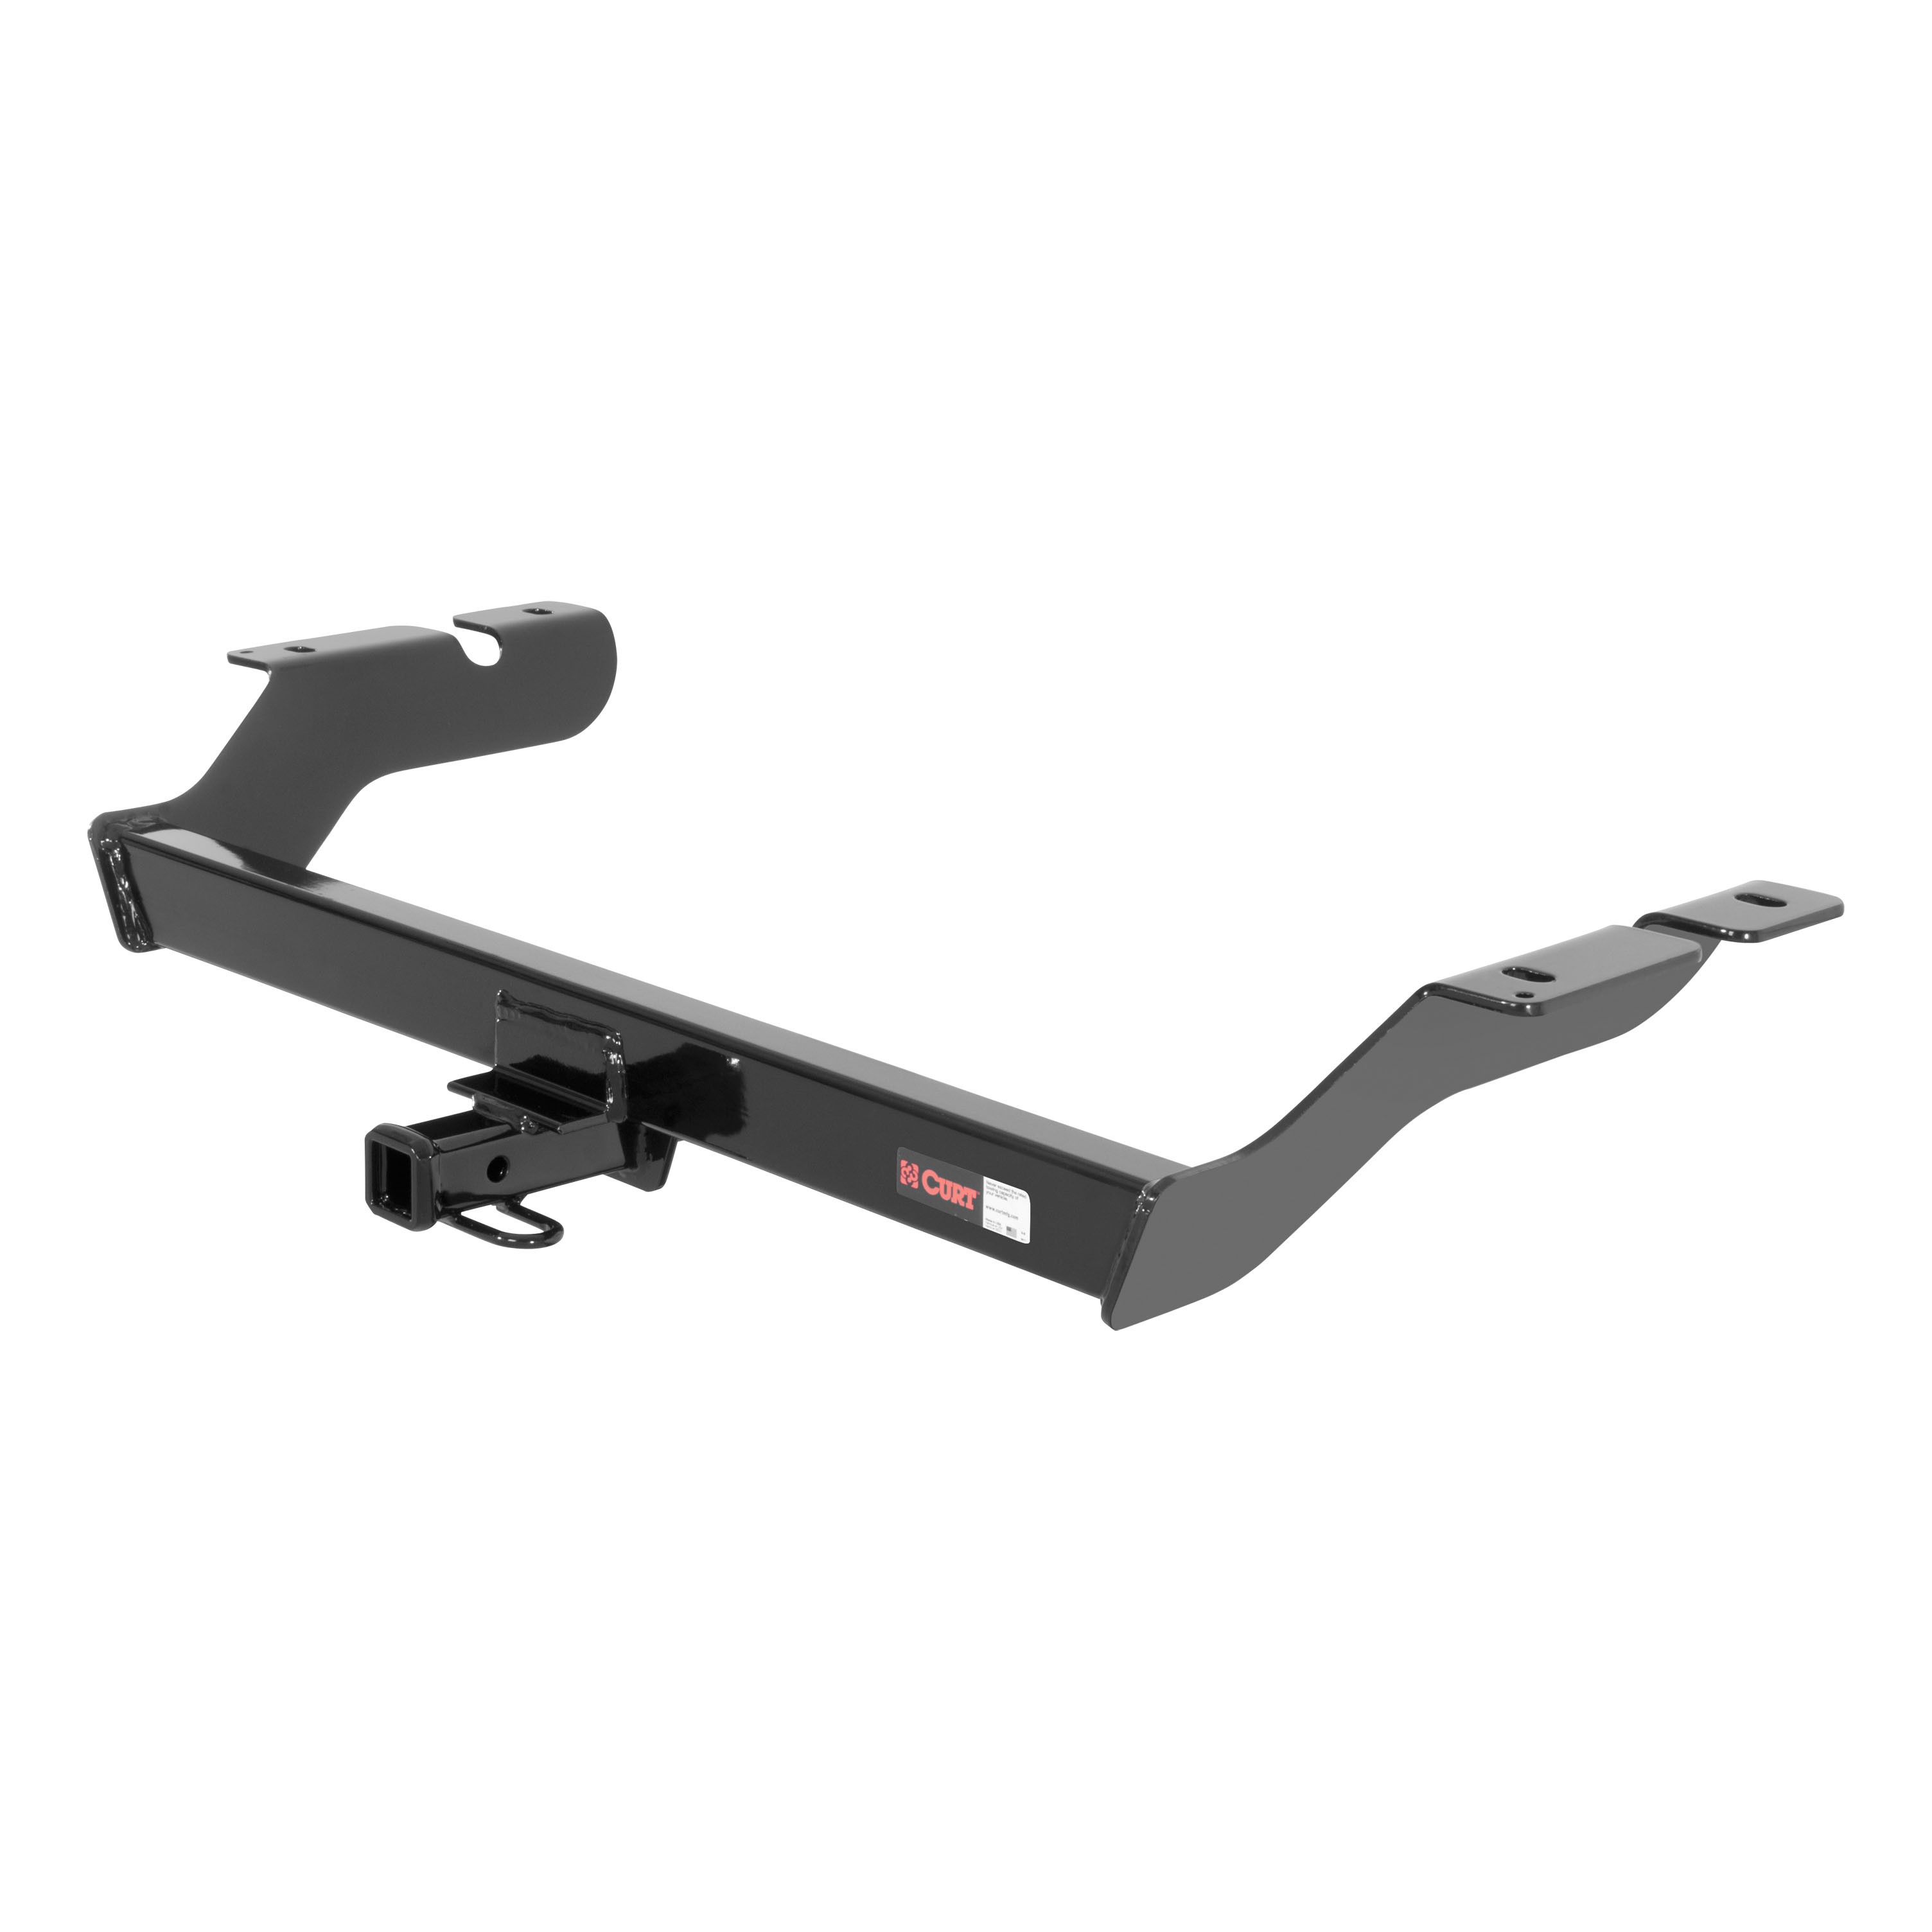 Curt Class 1 Trailer Hitch Receiver 11357 For Nissan Altima Coupe 2008 2008 Nissan Altima Trailer Hitch